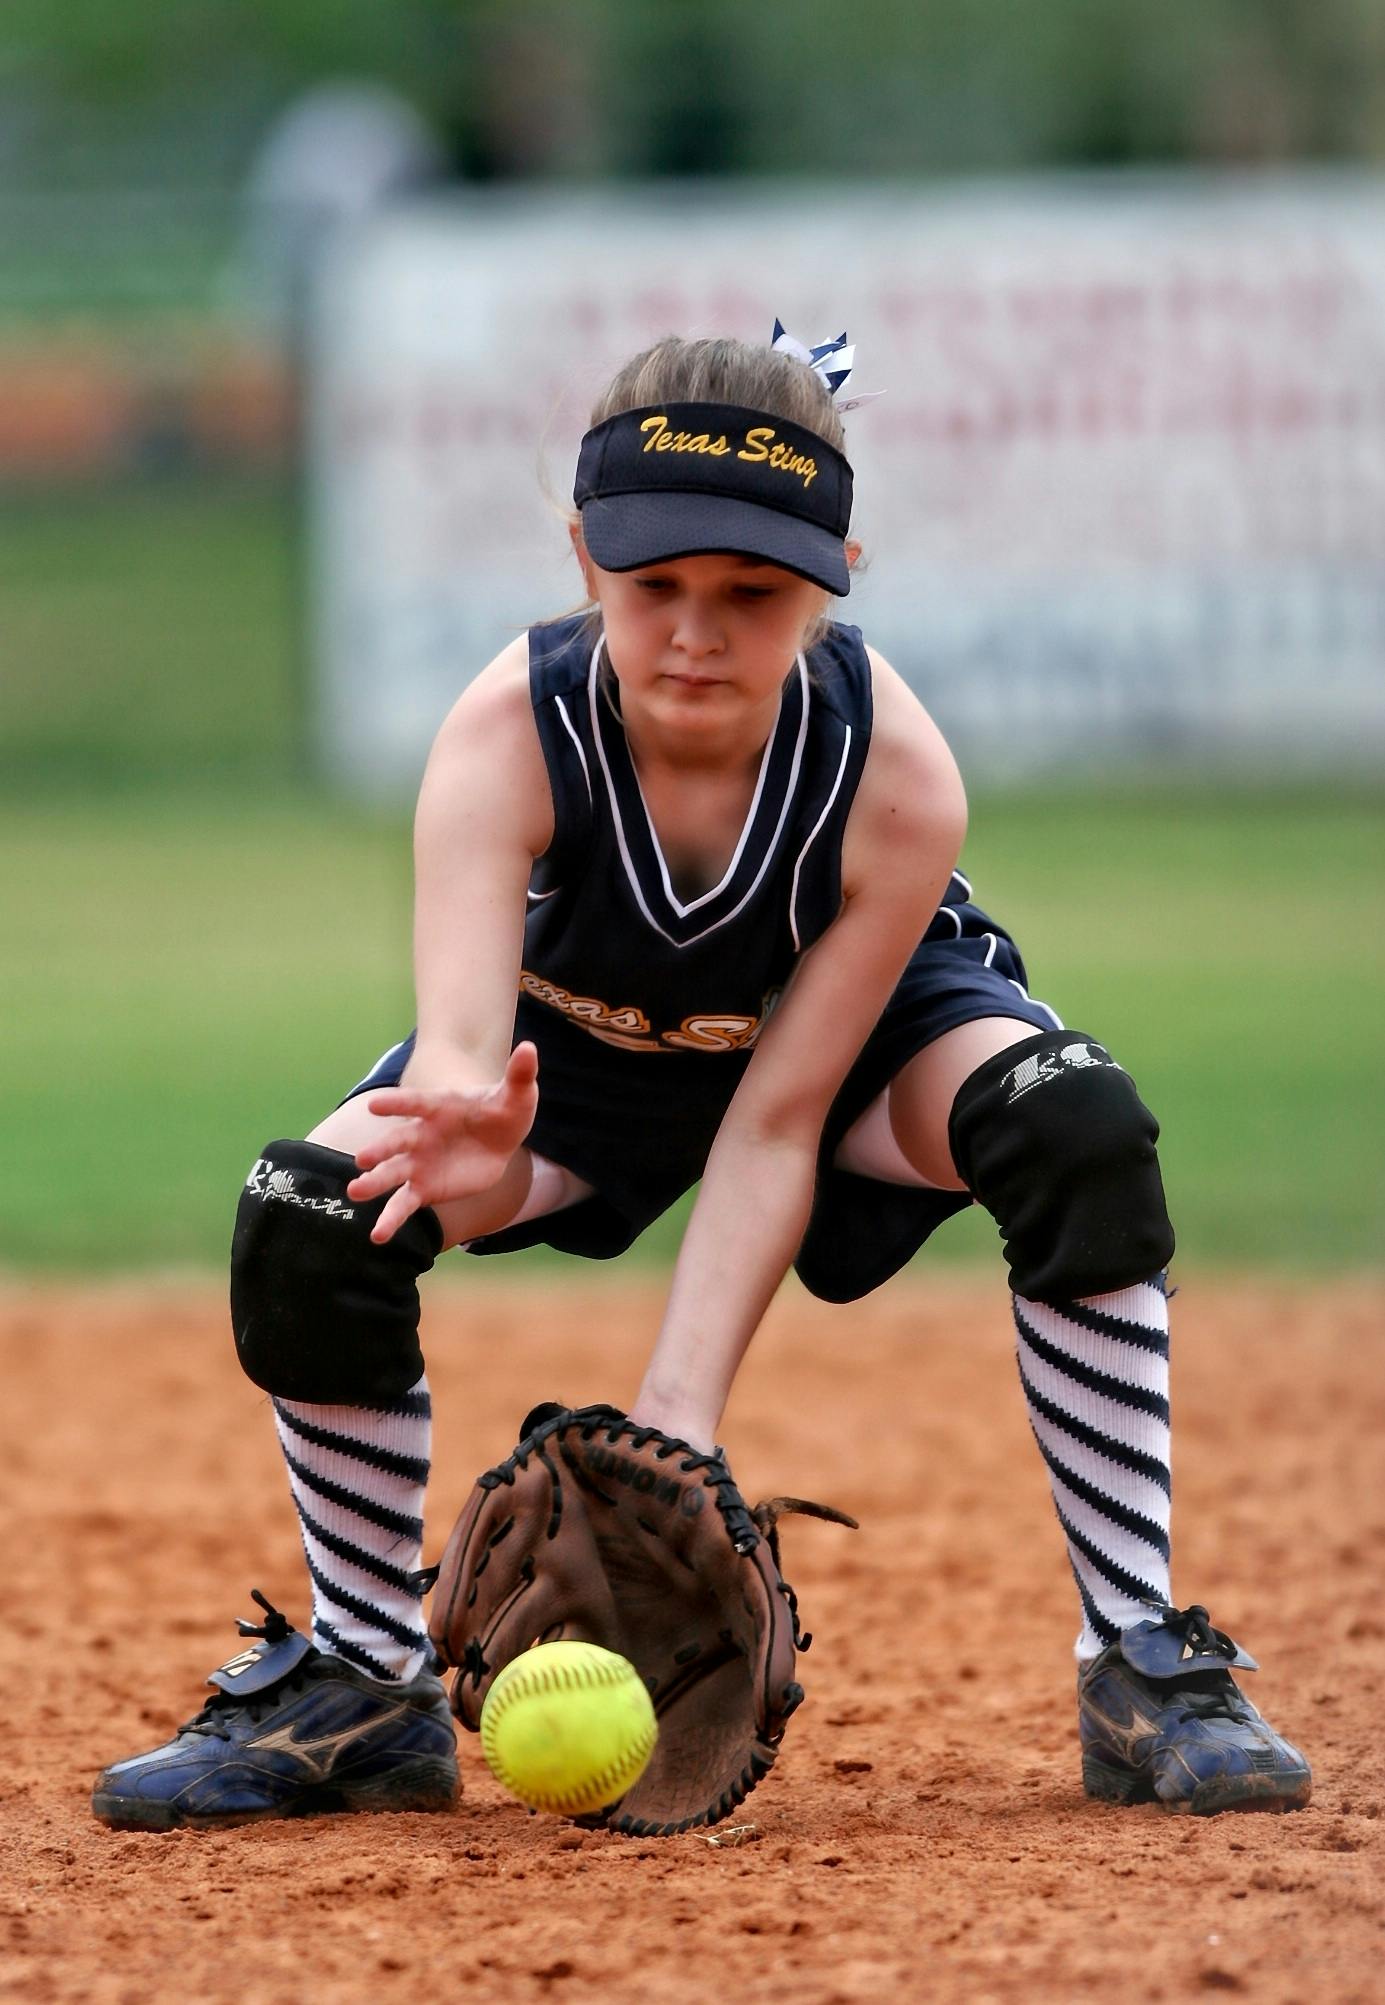 Softball Player About to Catch Ball · Free